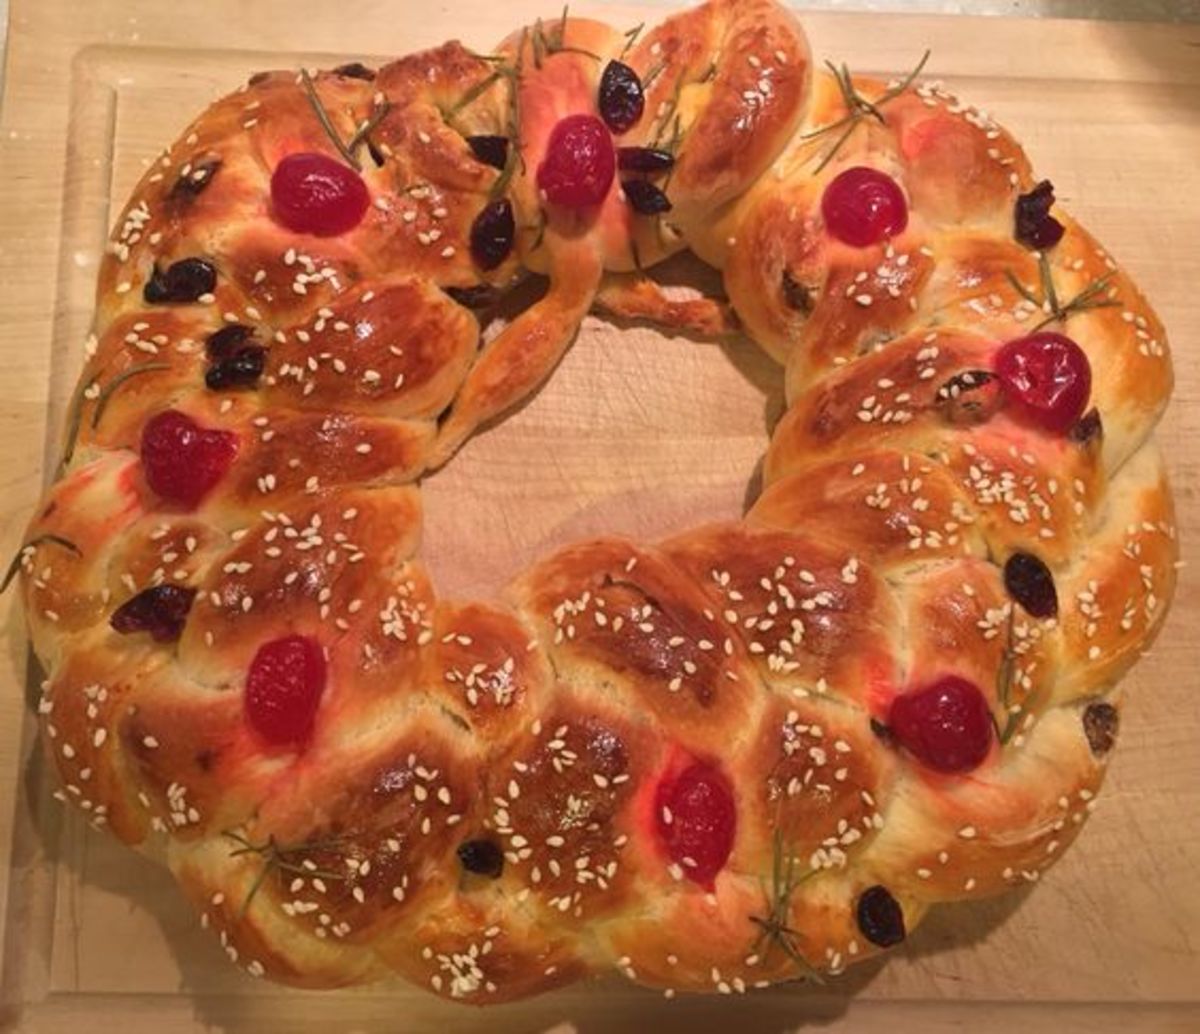 This Christmas wreath bread is studded with dried fruits.